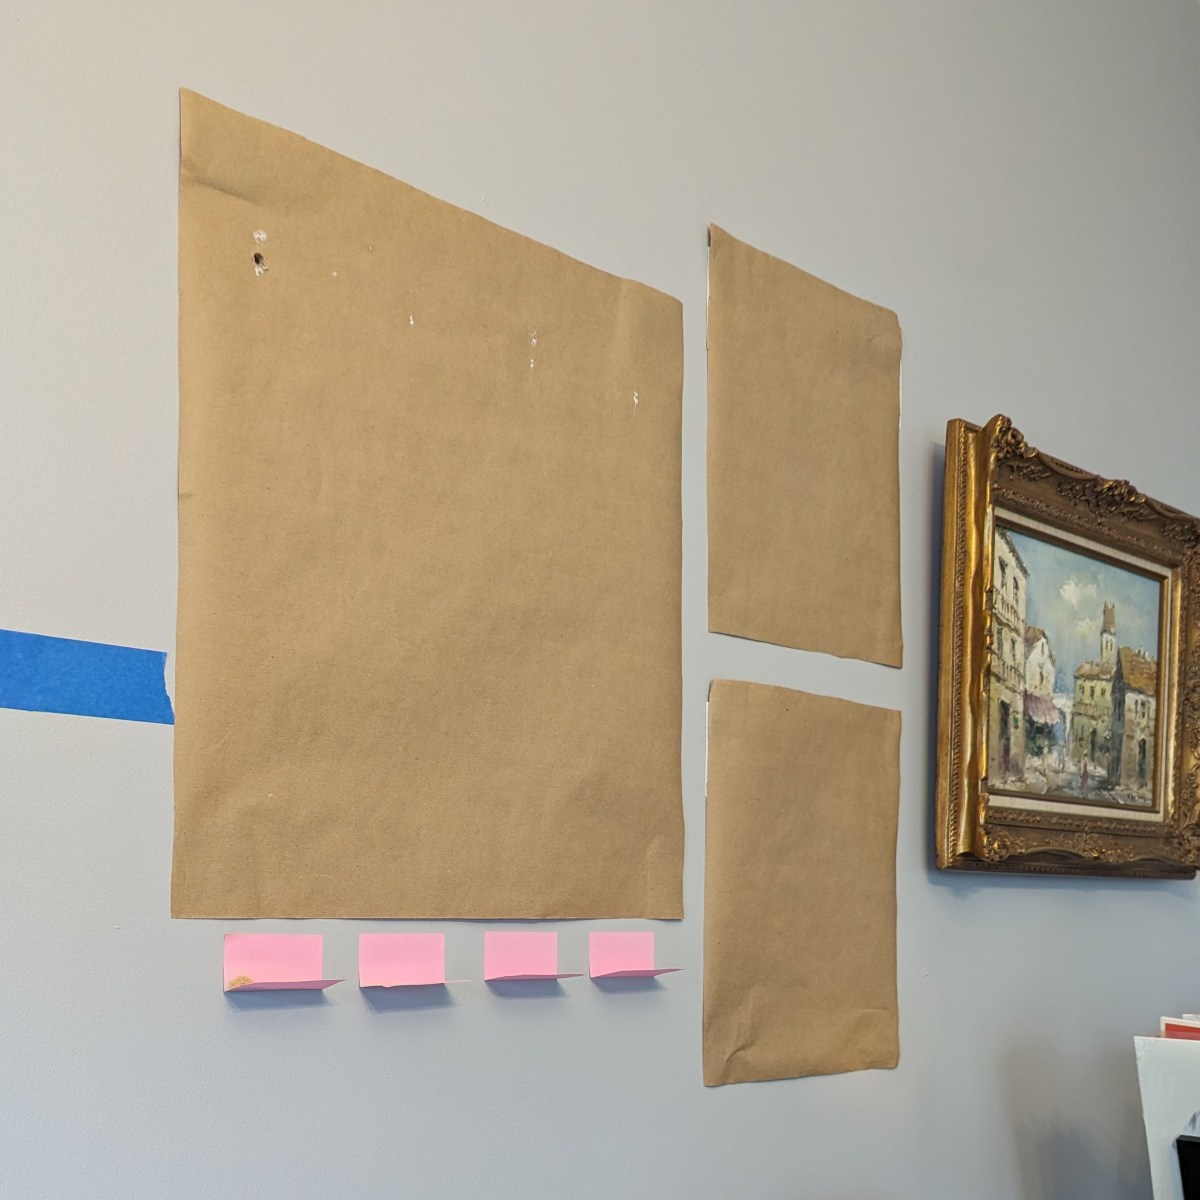 This picture-hanging hack uses sticky notes to collect drywall dust